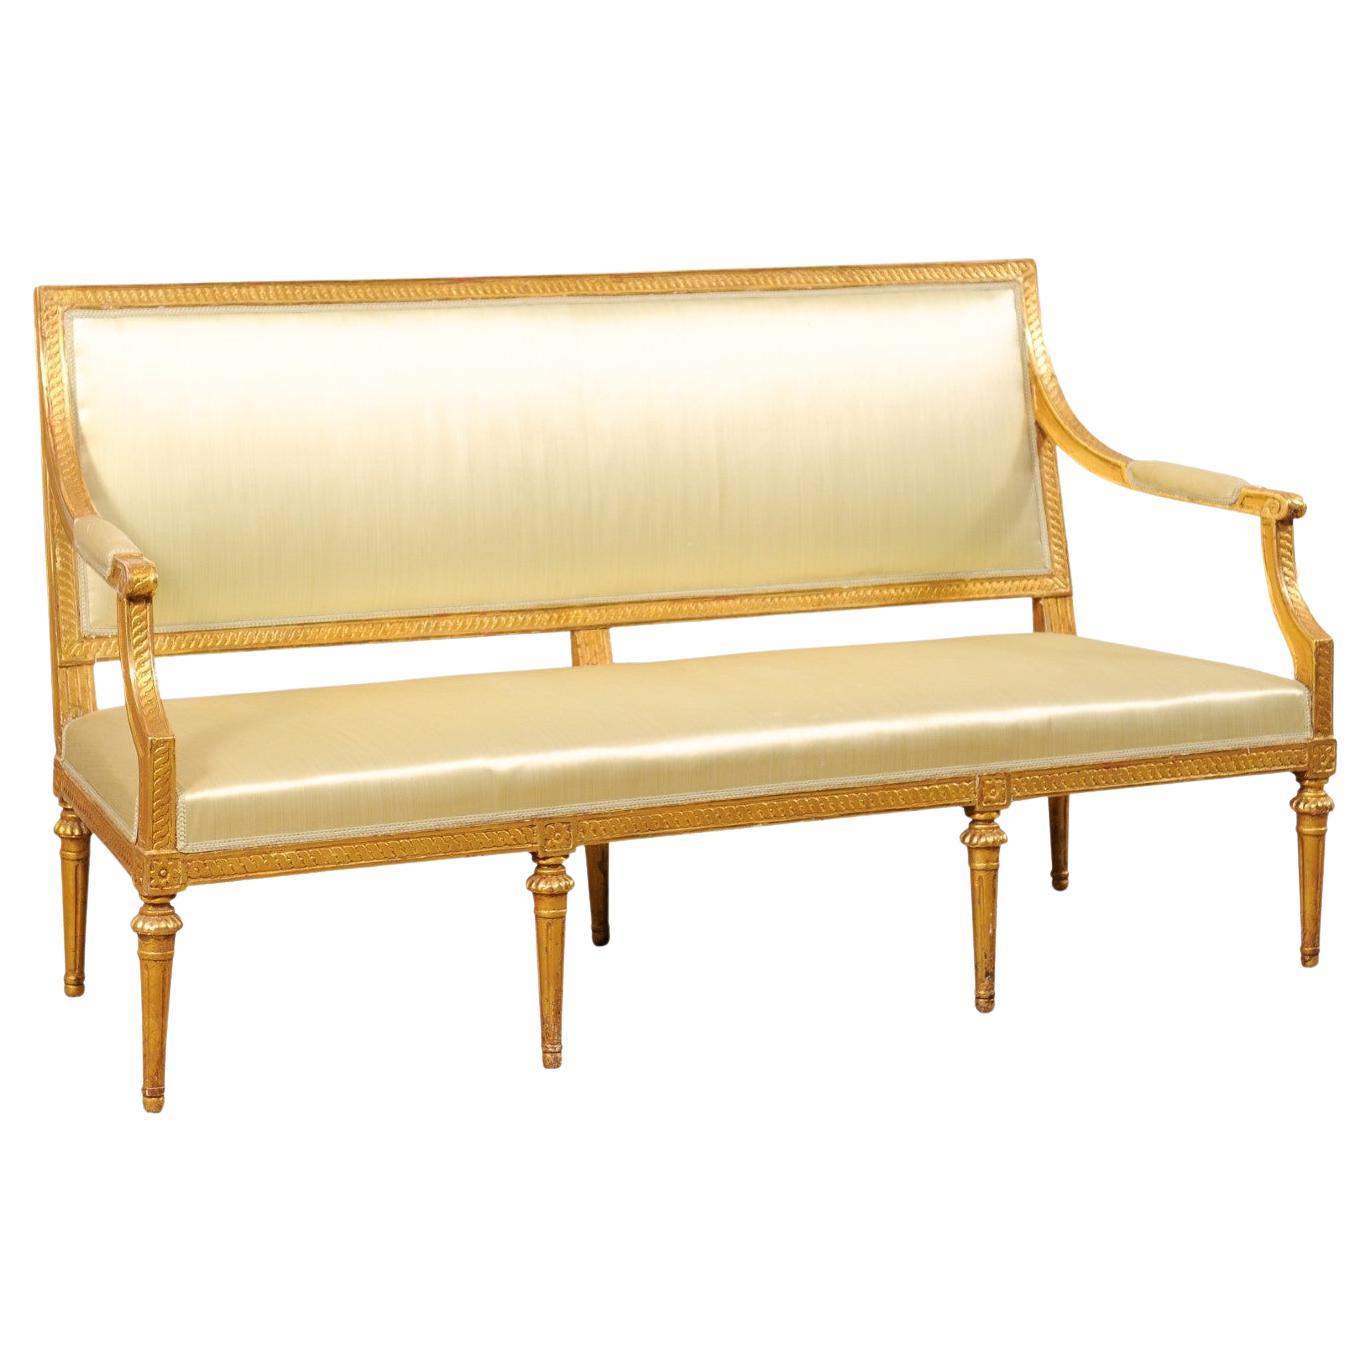 Swedish Neoclassical Style Carved Gilt-Wood & Upholstered Sofa Bench, 19th C. For Sale